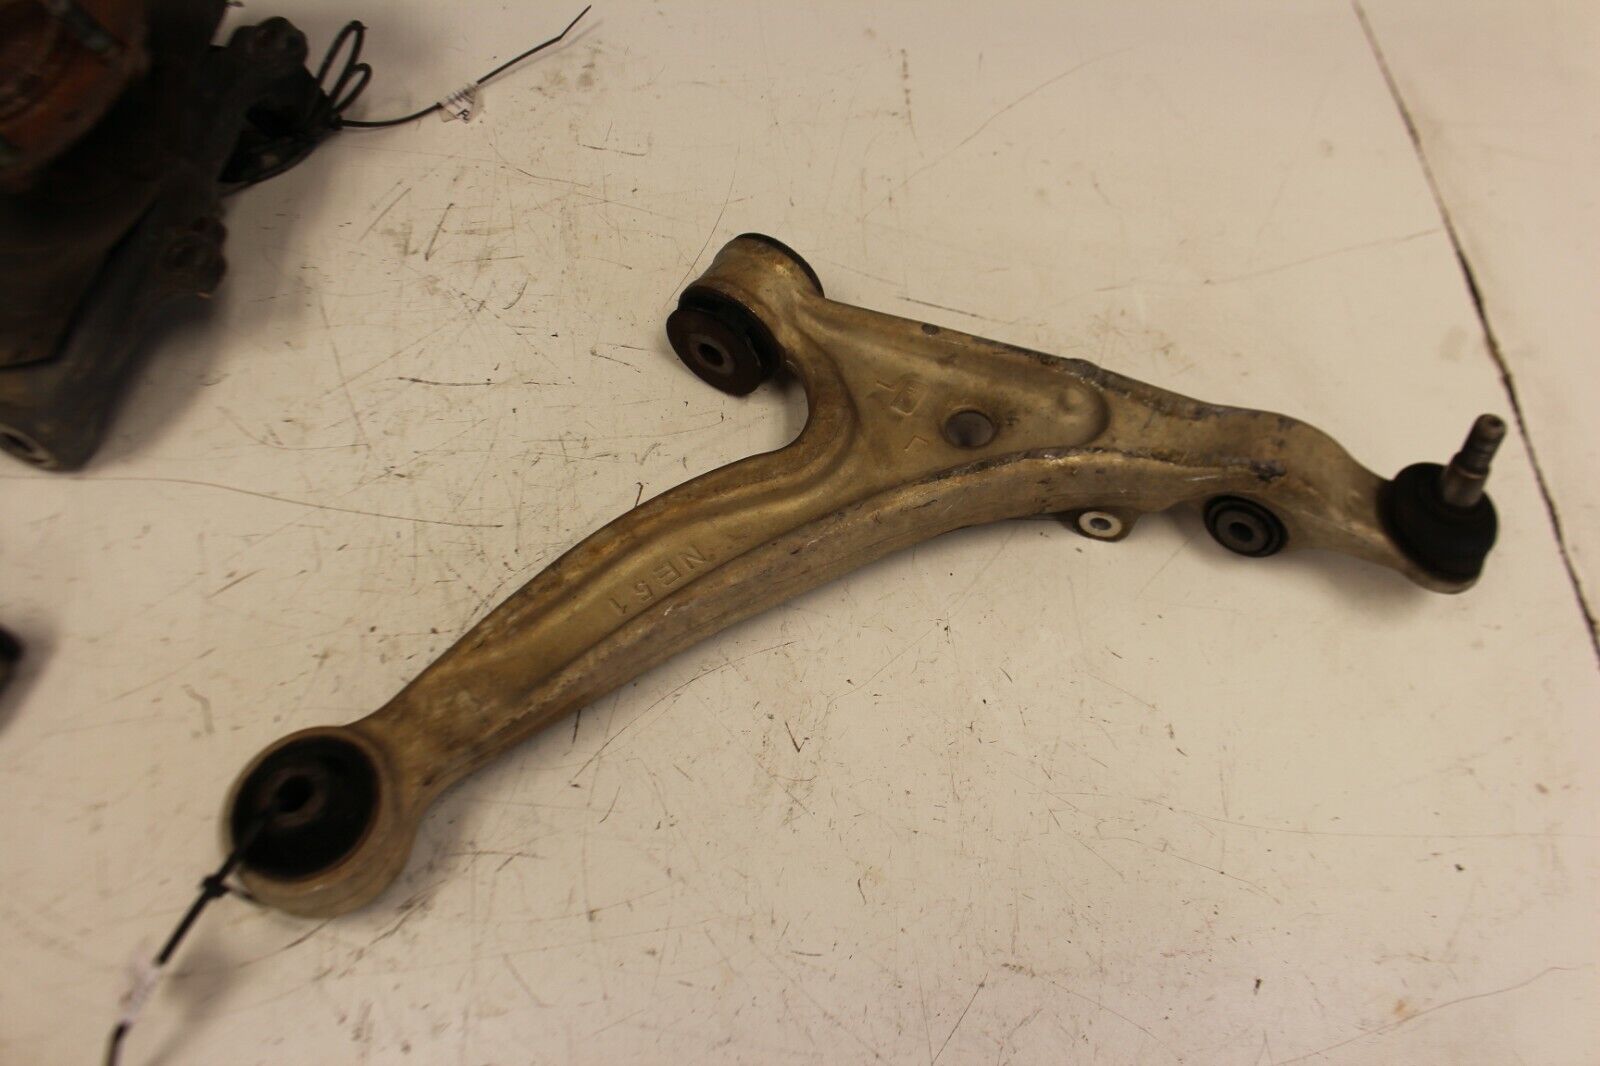 06-14 MAZDA MIATA MX-5 FRONT DRIVER SIDE KNUCKLE SPINDLE CONTROL ARM KNEE ASSY